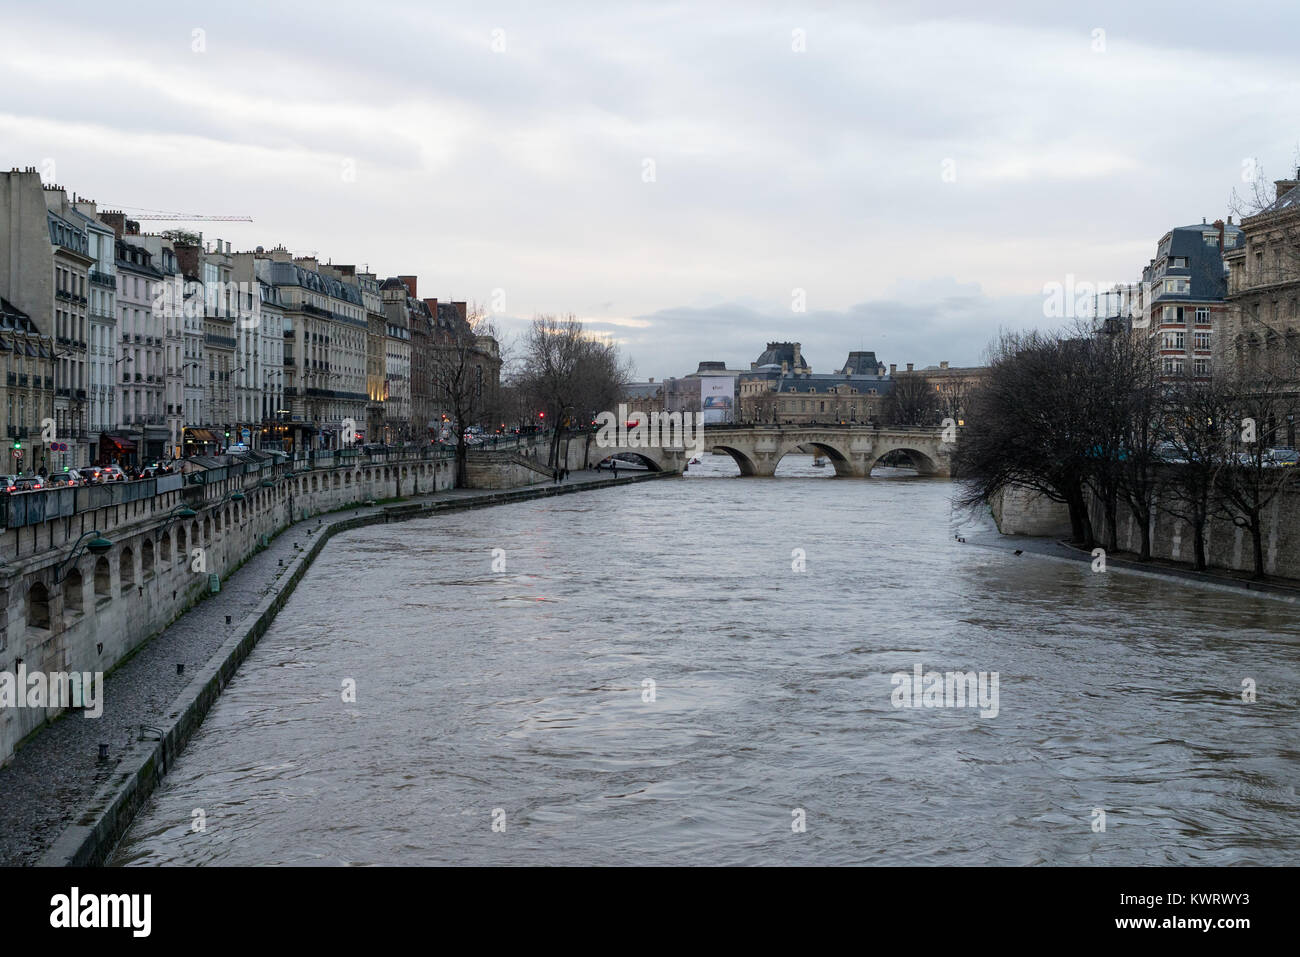 Paris, France. January 5, 2018. Paris, Notre Dame. Emergency services cordoned off a part of the Seine amid an ongoing search operation for member of the river police brigade that went missing during a diving exercise in the Seine, during the afternoon hours. Credit: Hector Rodriguez/Alamy Live News Stock Photo